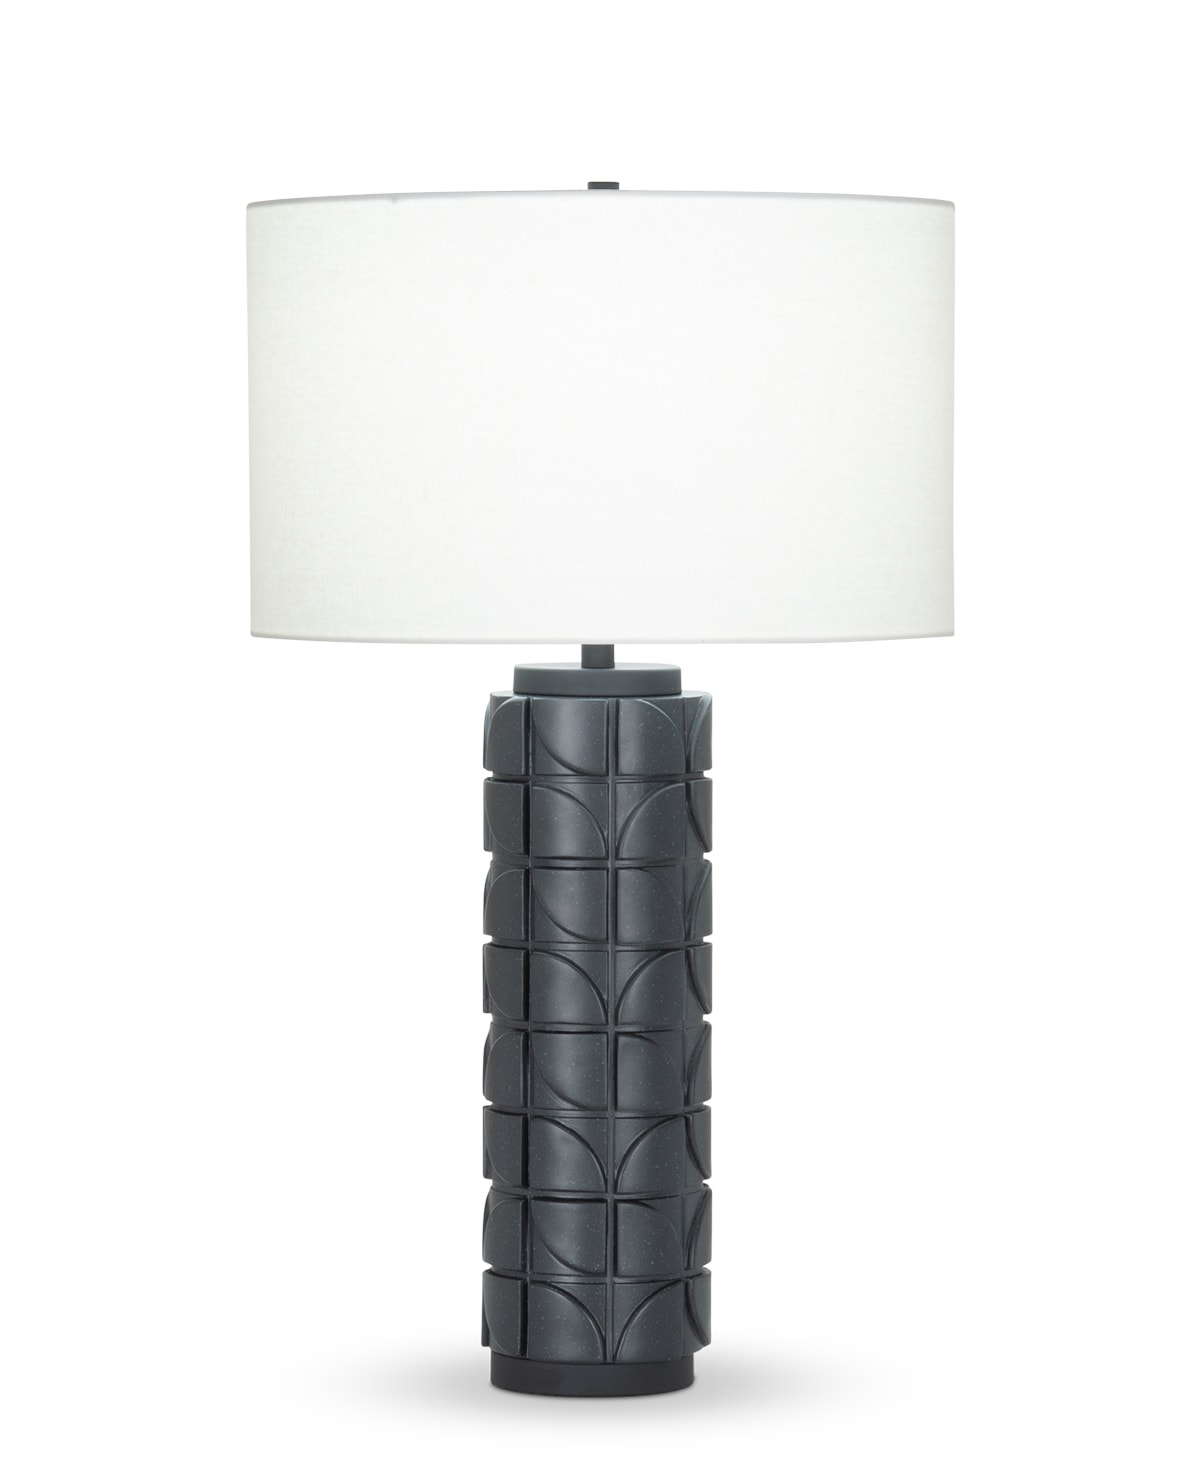 FlowDecor Mimi Table Lamp in resin with black finish and off-white linen drum shade (# 4437)